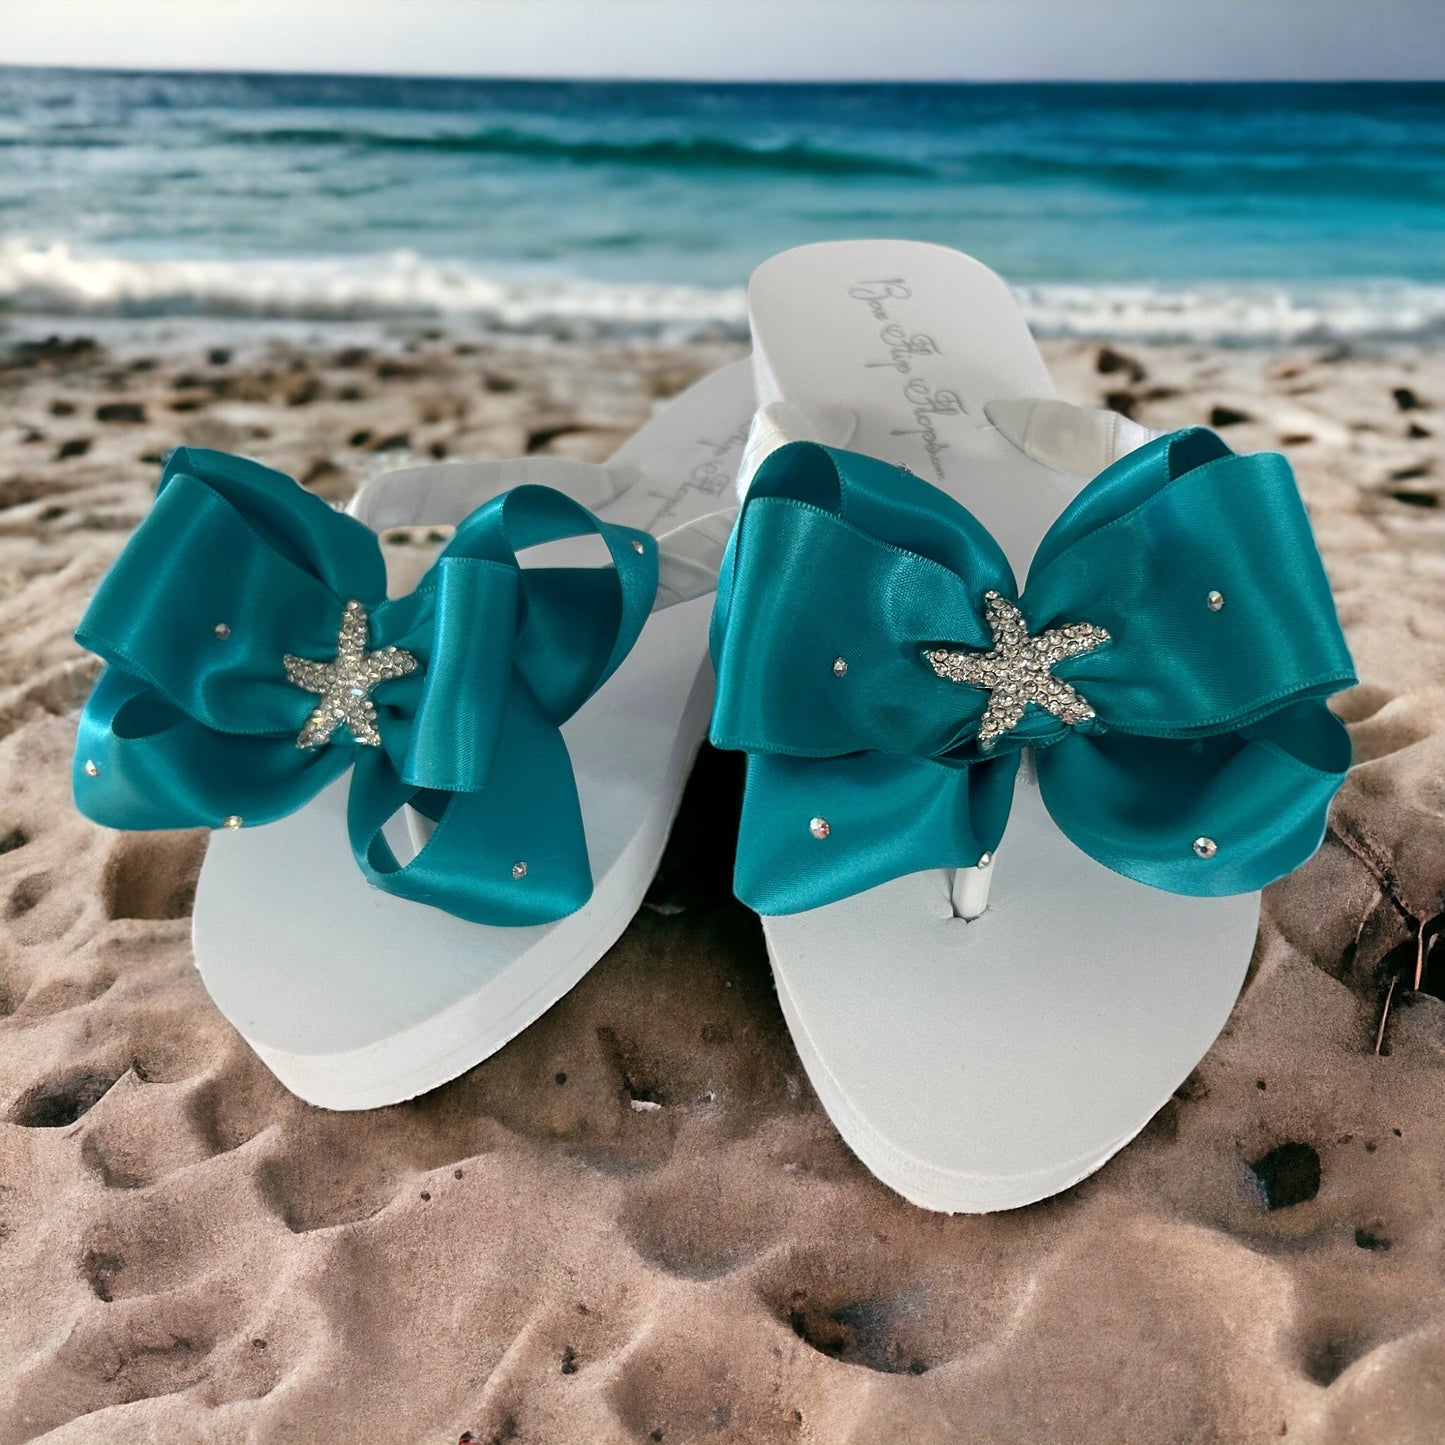 Pearl Bow Flip Flops with Crystal Rhinestone Accents, White or Ivory